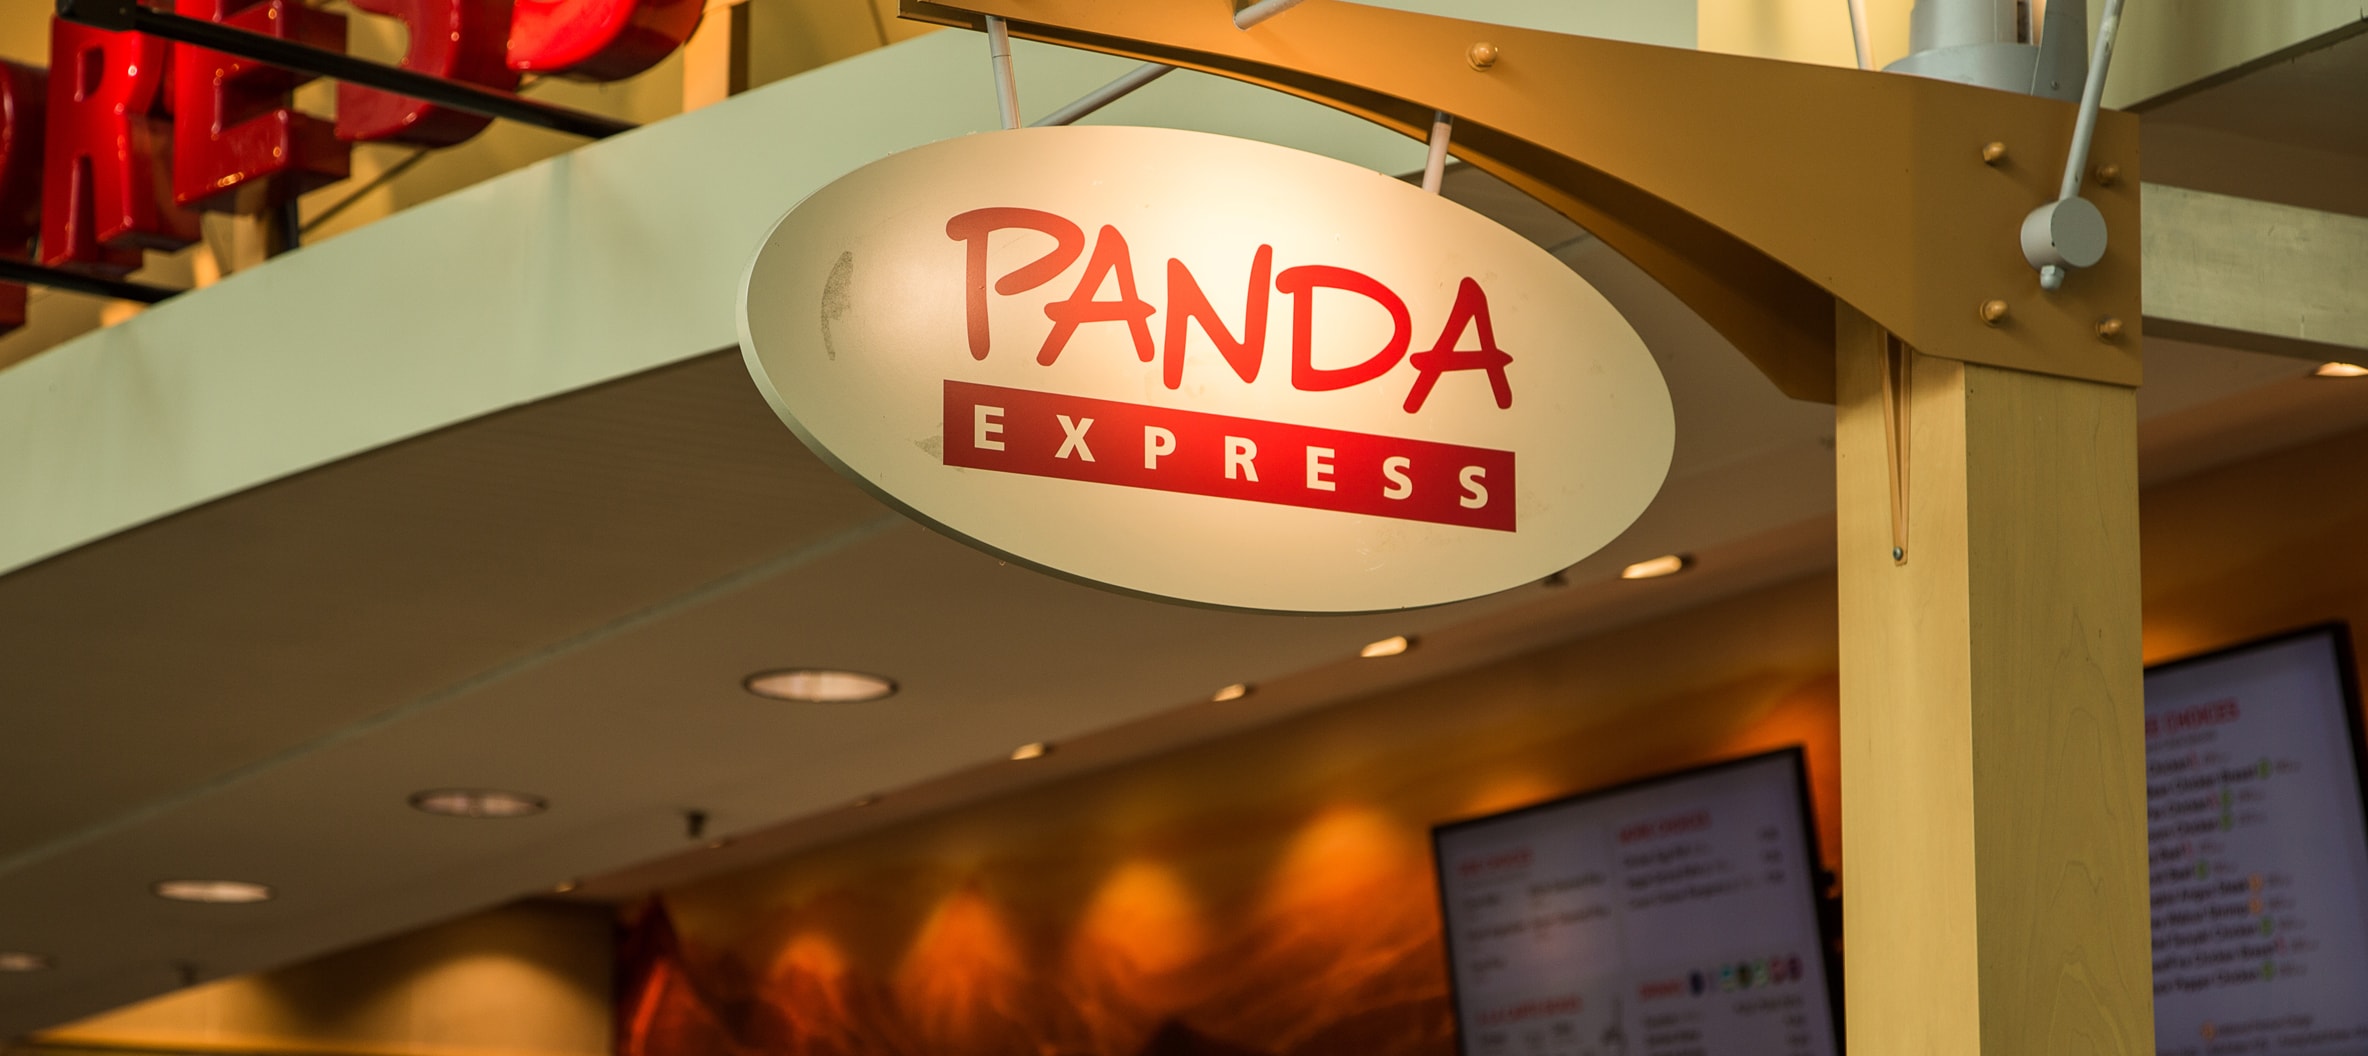 Panda Express Auburn Hills Great Lakes Crossing Outlets